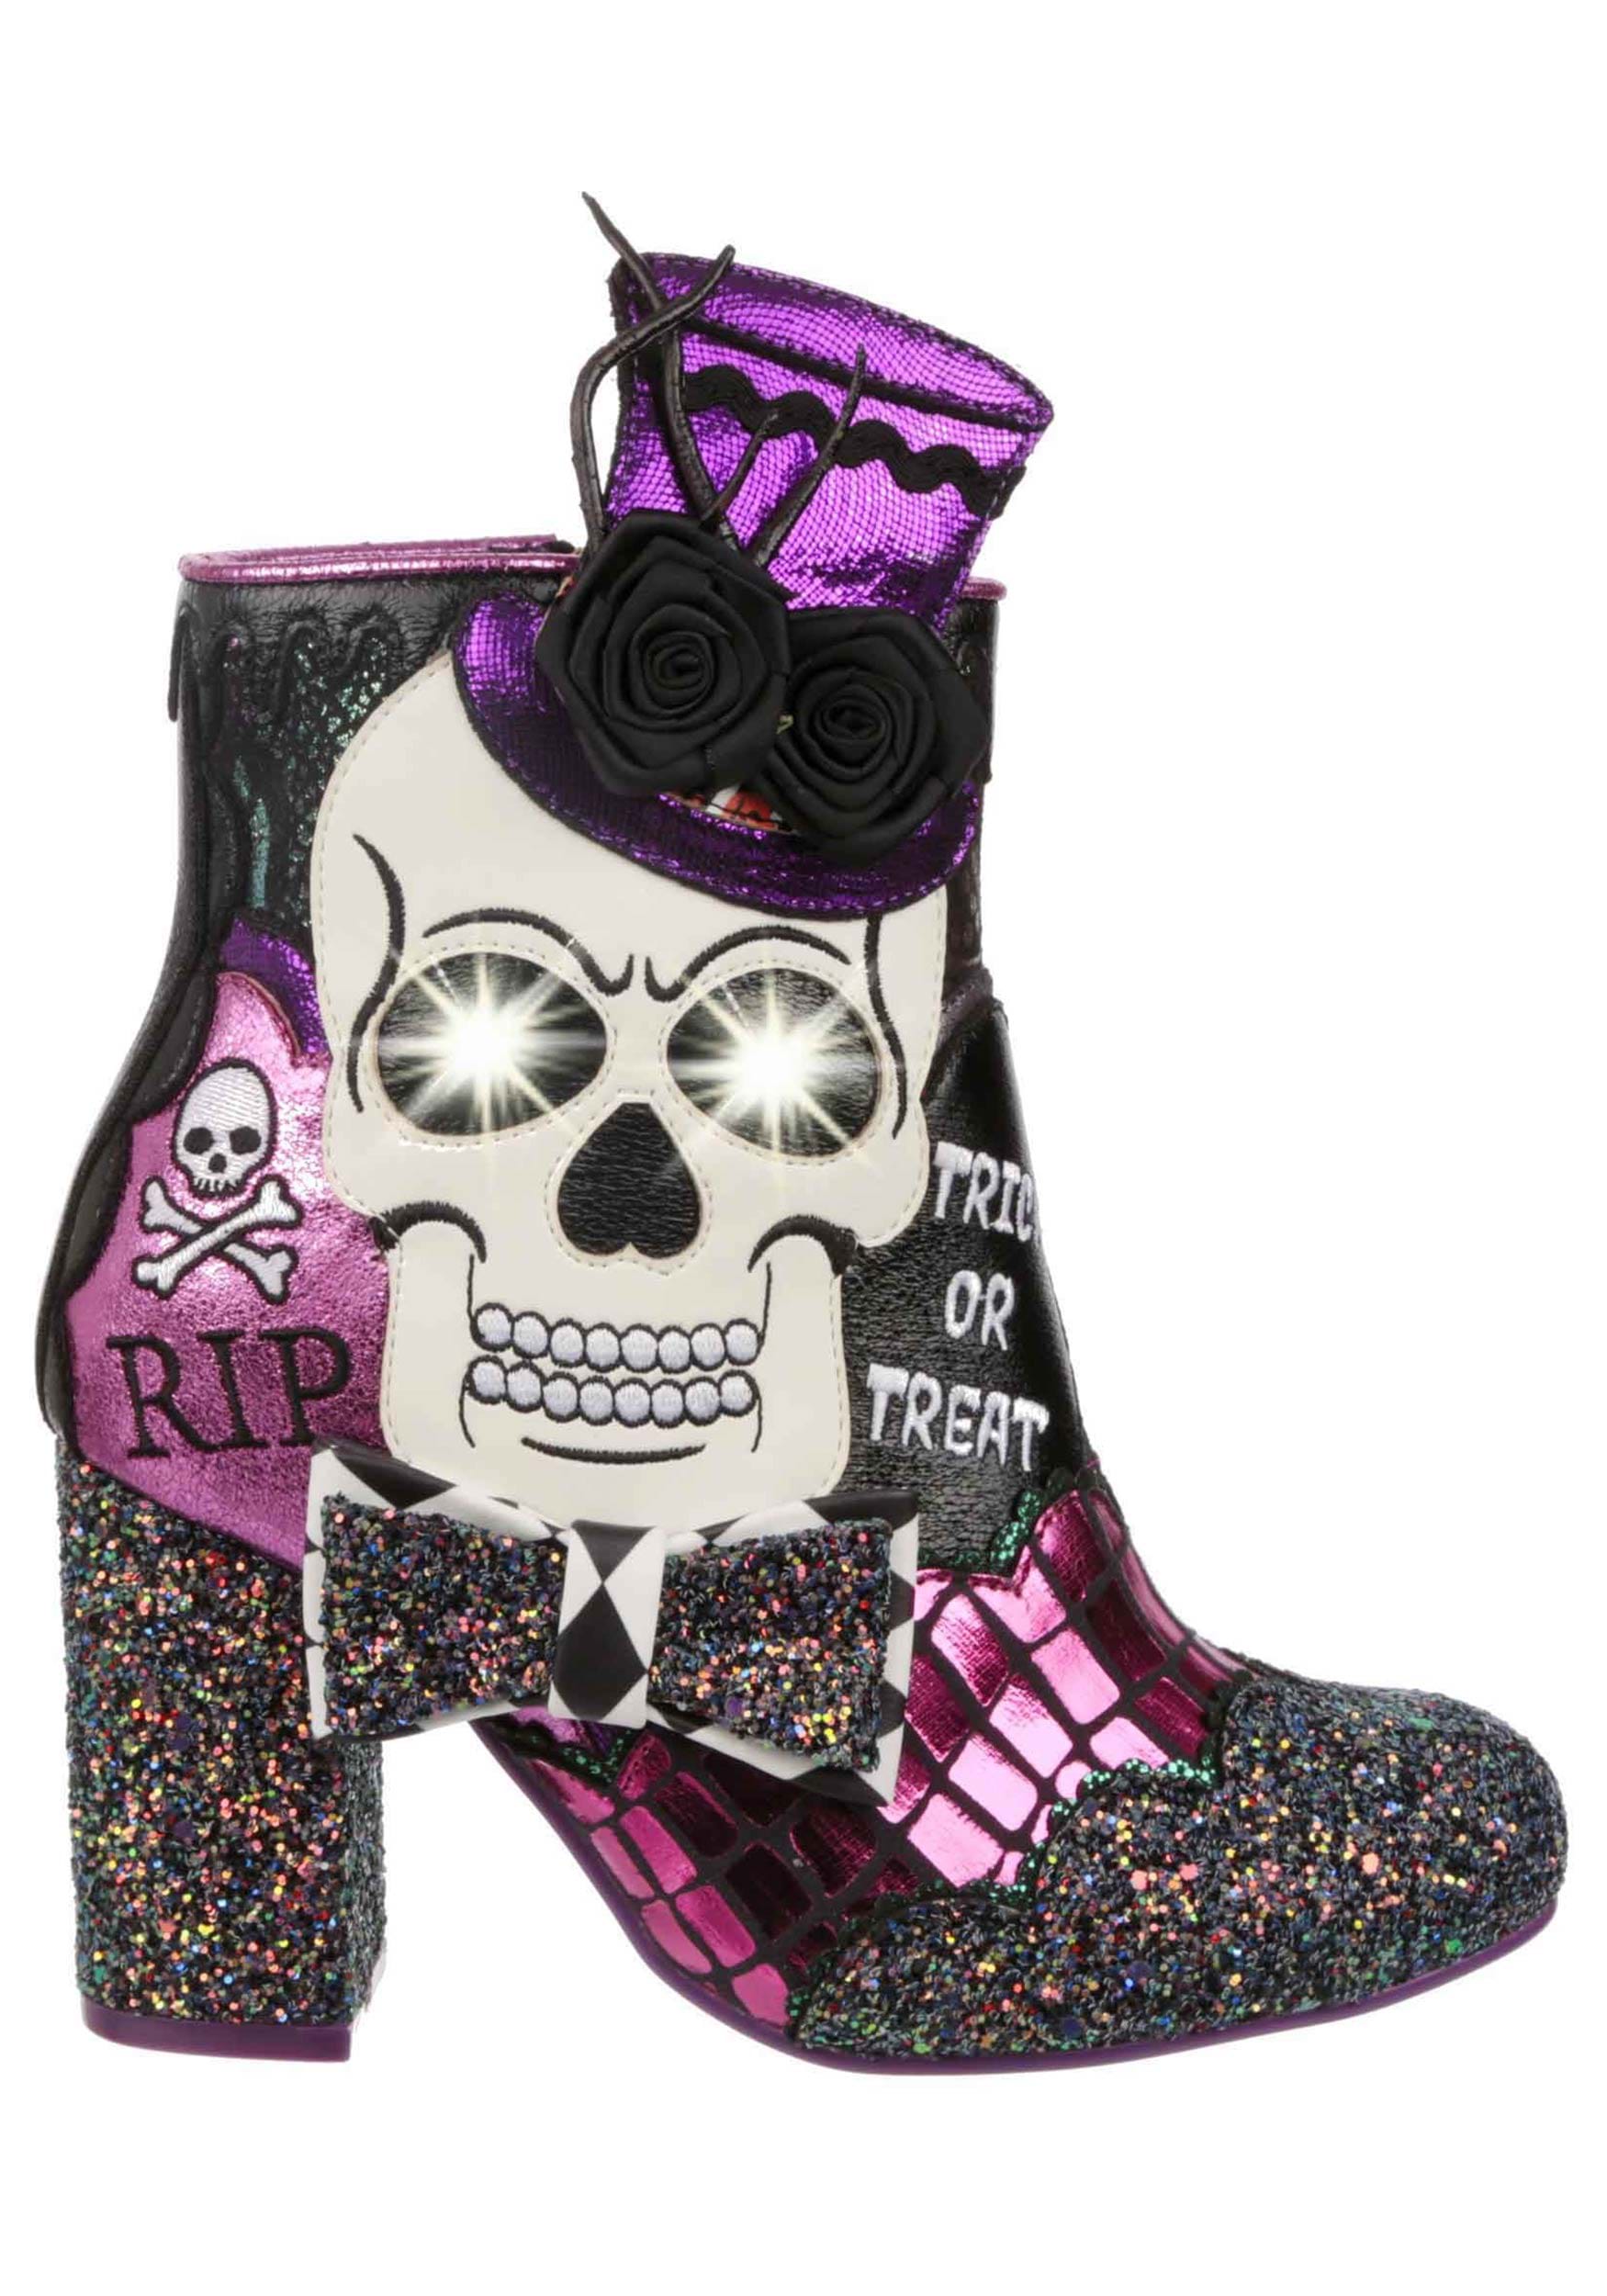 Image of Irregular Choice Dance of the Dead Ankle Boot Heel by Irregular Choice